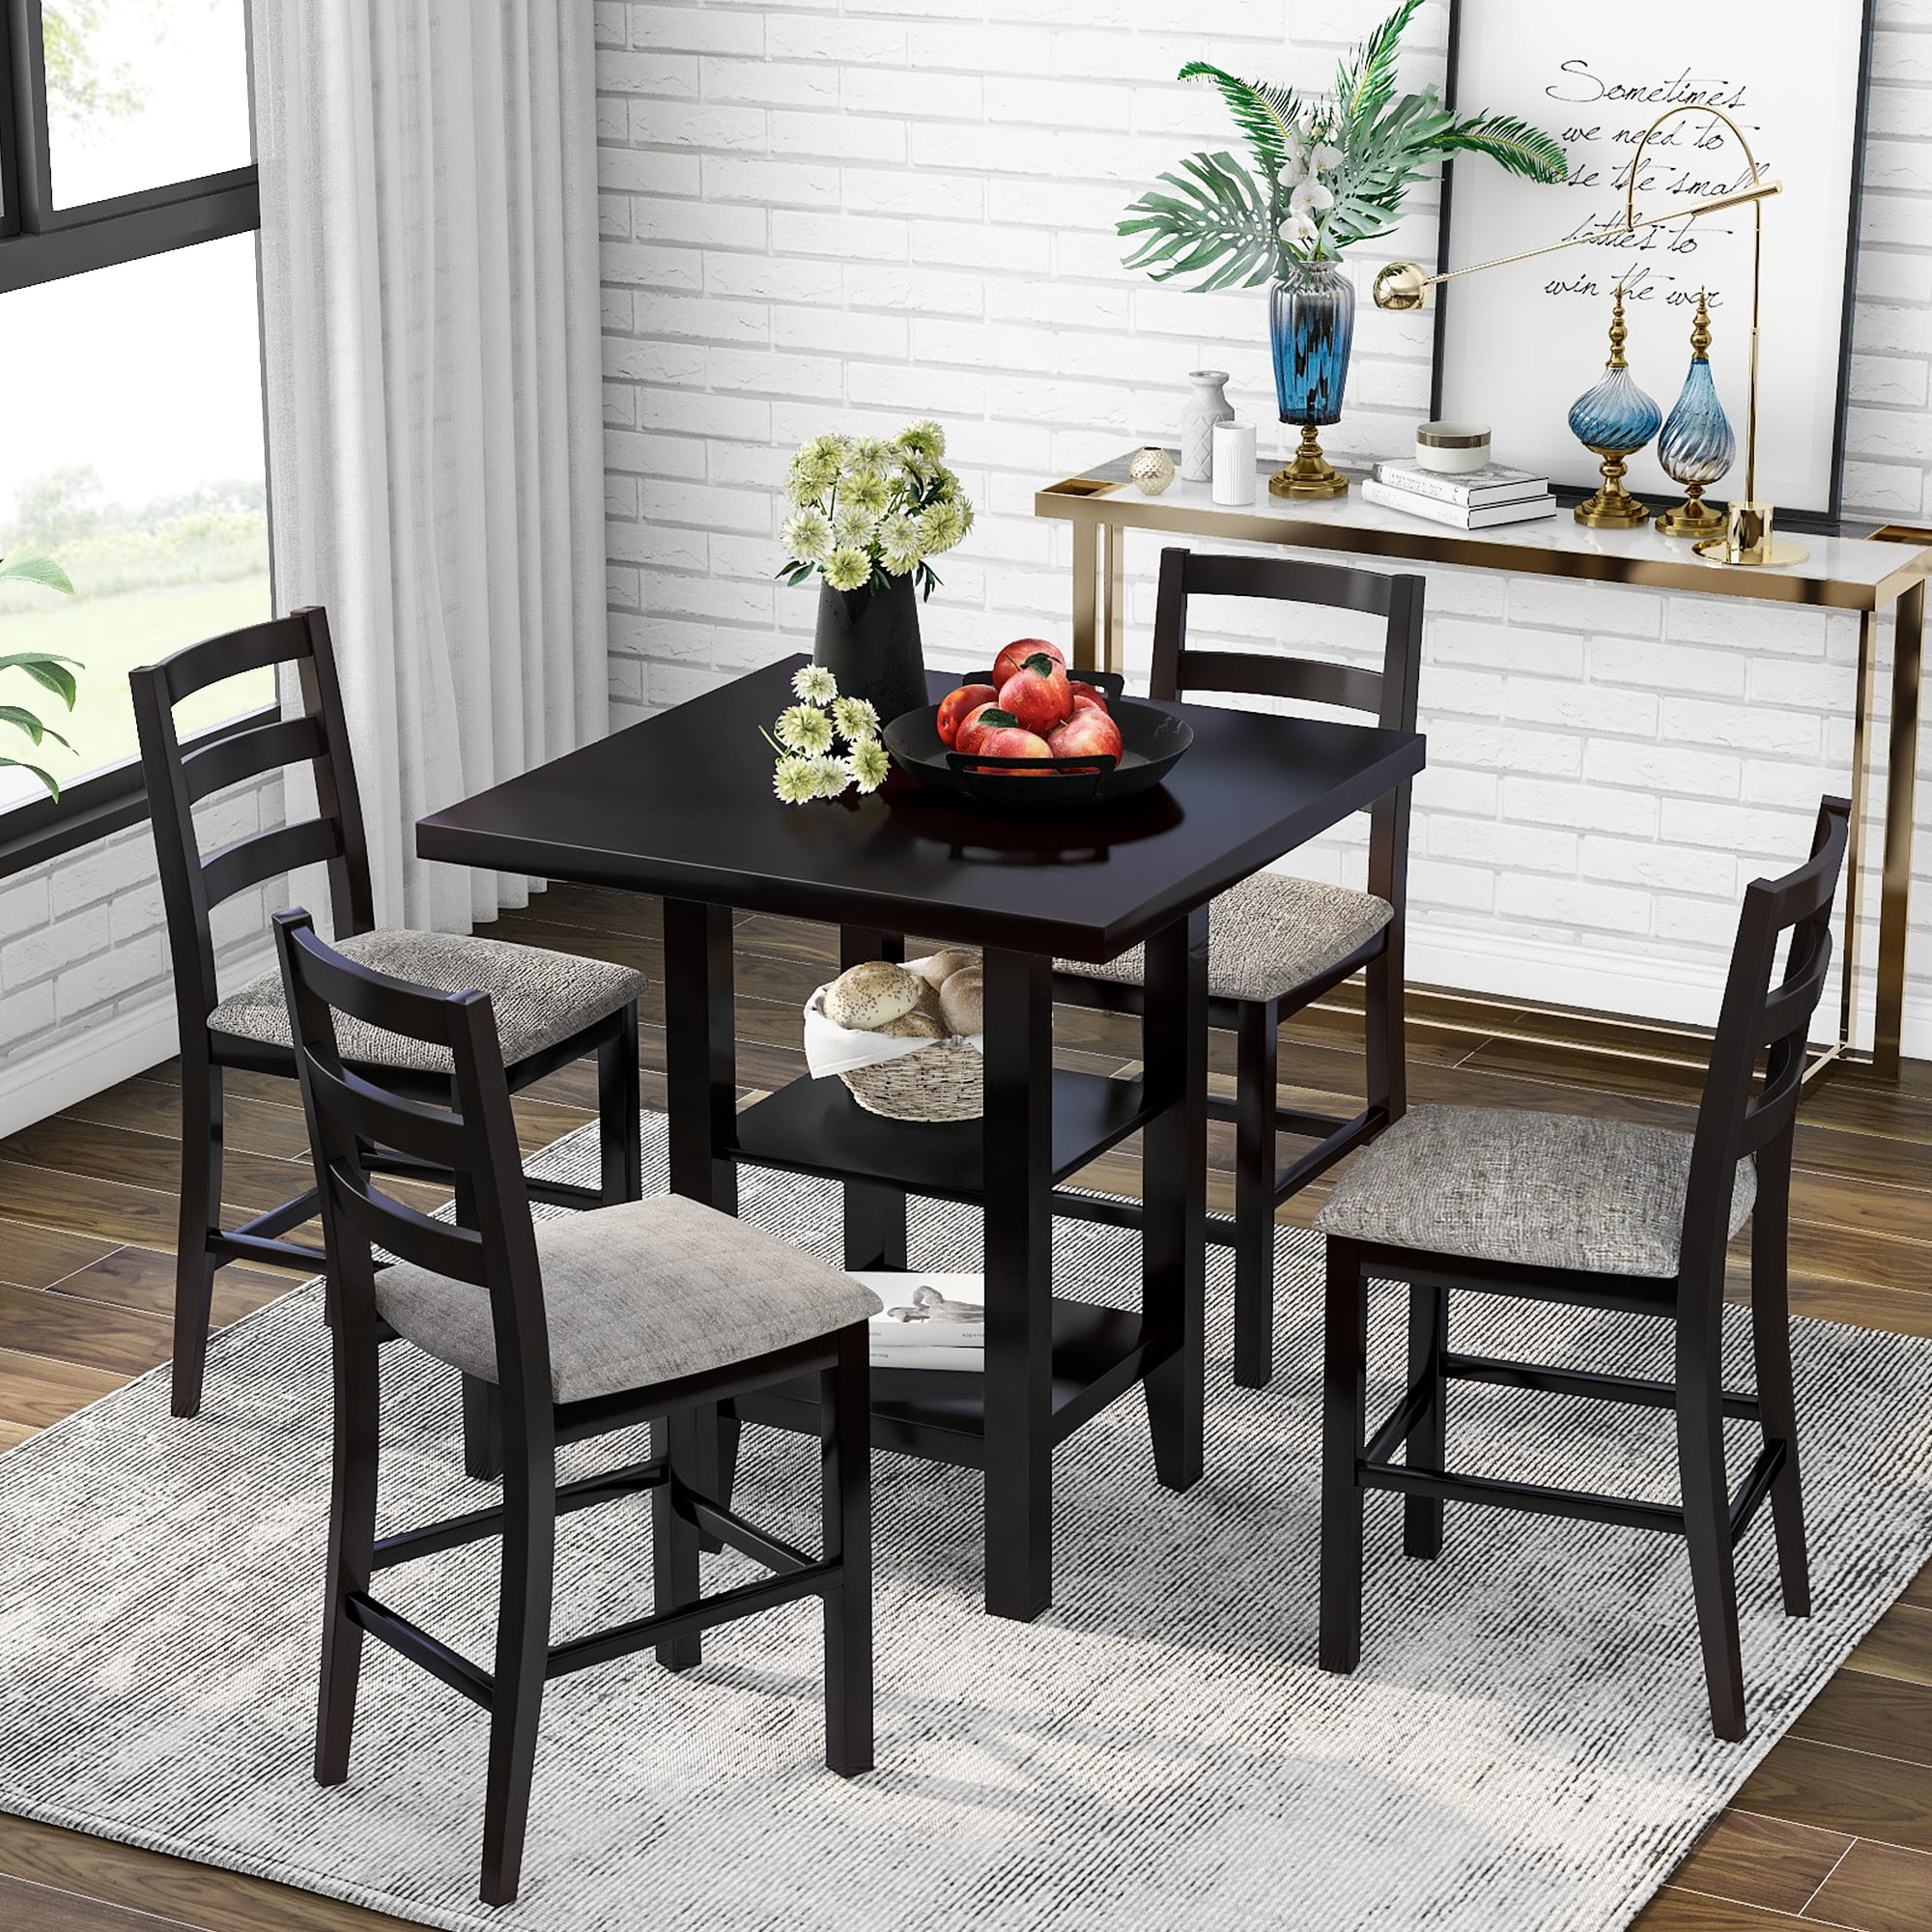 Details about   5 Piece Dining Set Wooden with 4 Padded Dining Chairs Kitchen for Small Spaces 